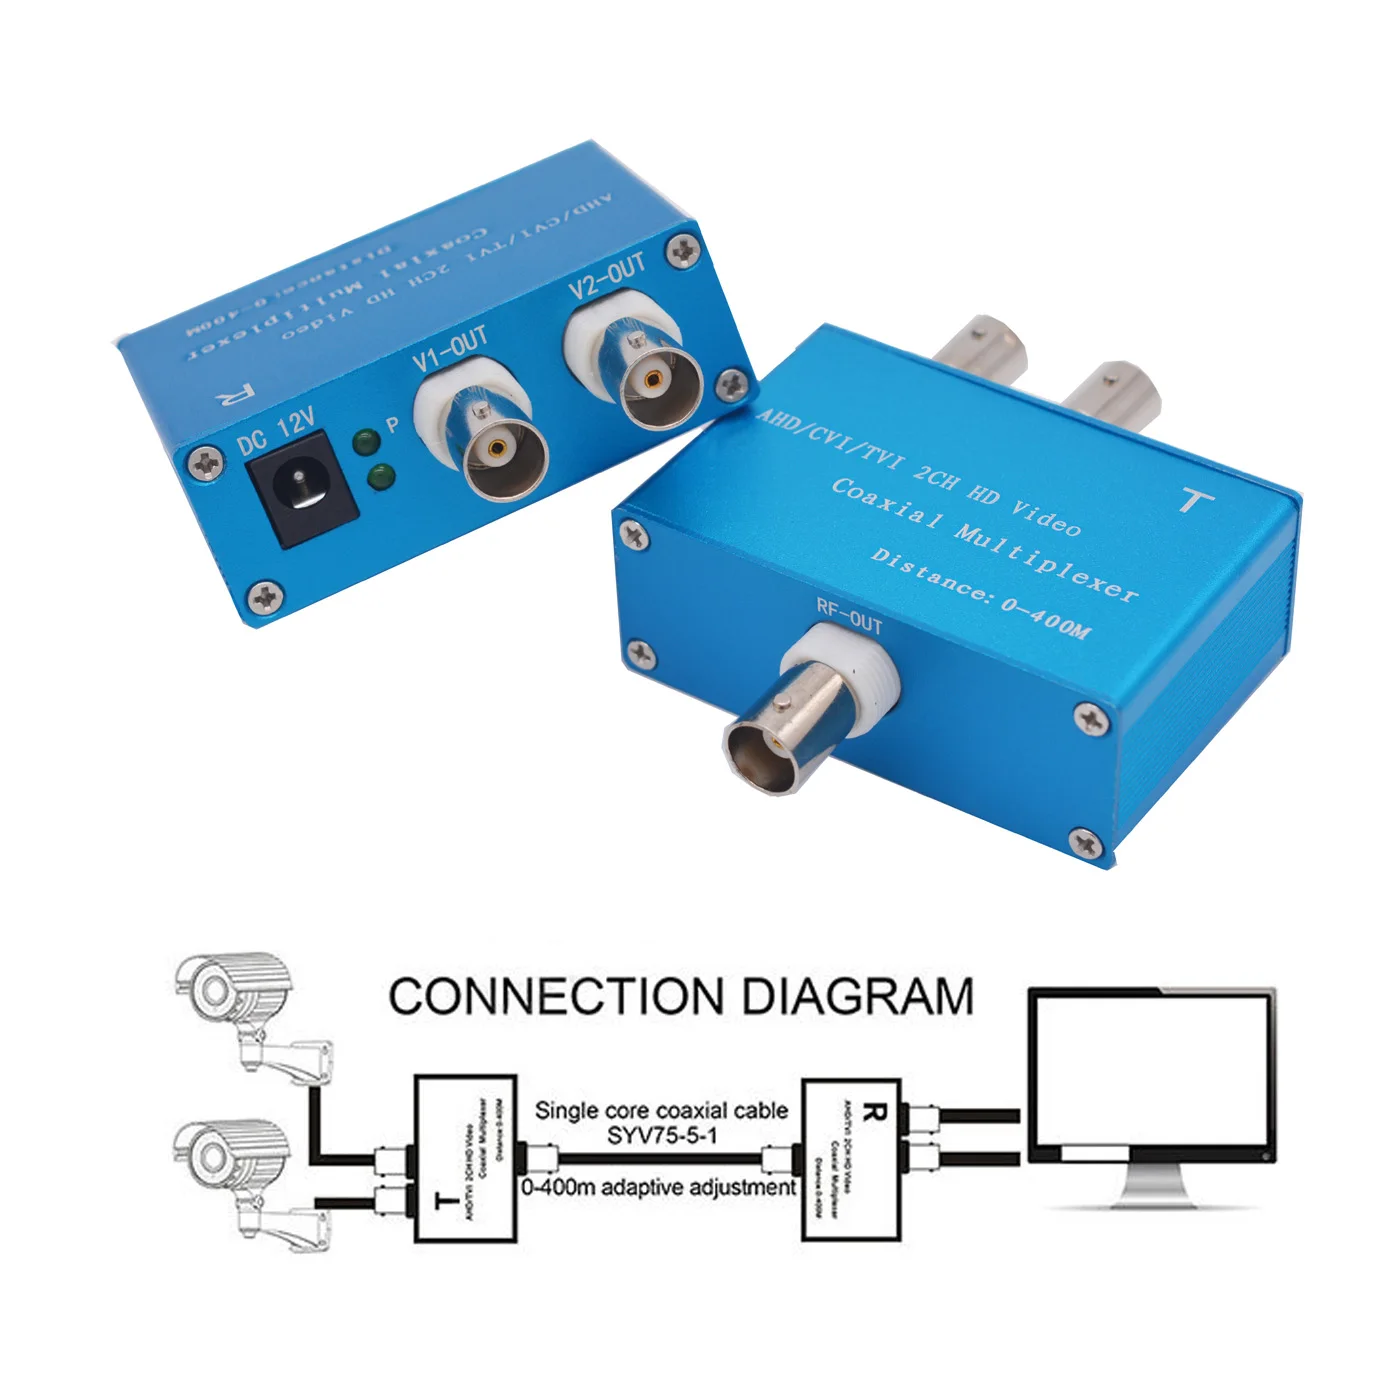 2 x HD Video over Coaxial Cable Converters, Video to RG59 Coaxial Multiplexer up to 400m for AHD/CVI/TVI/Analog Cameras One Pair